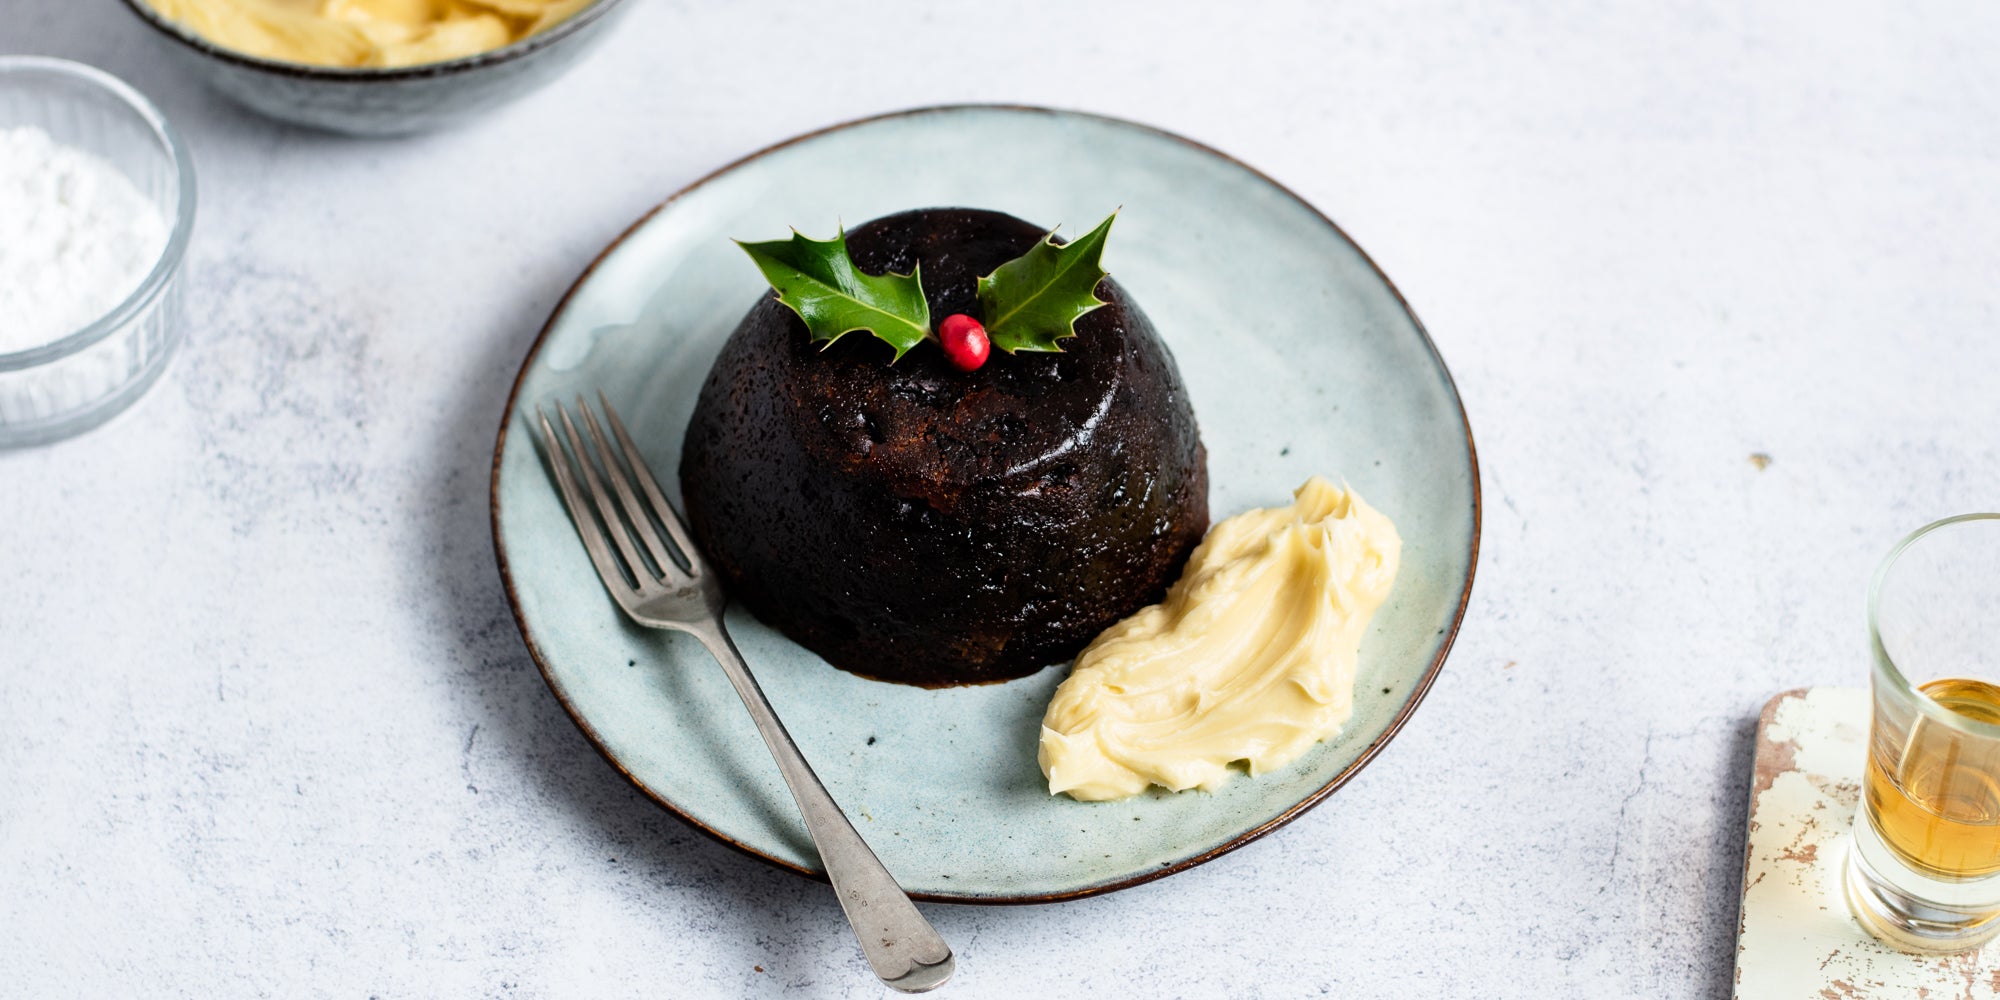 Top view of a christmas pudding next to a dollop of Brandy Butter with a fork ready to eat